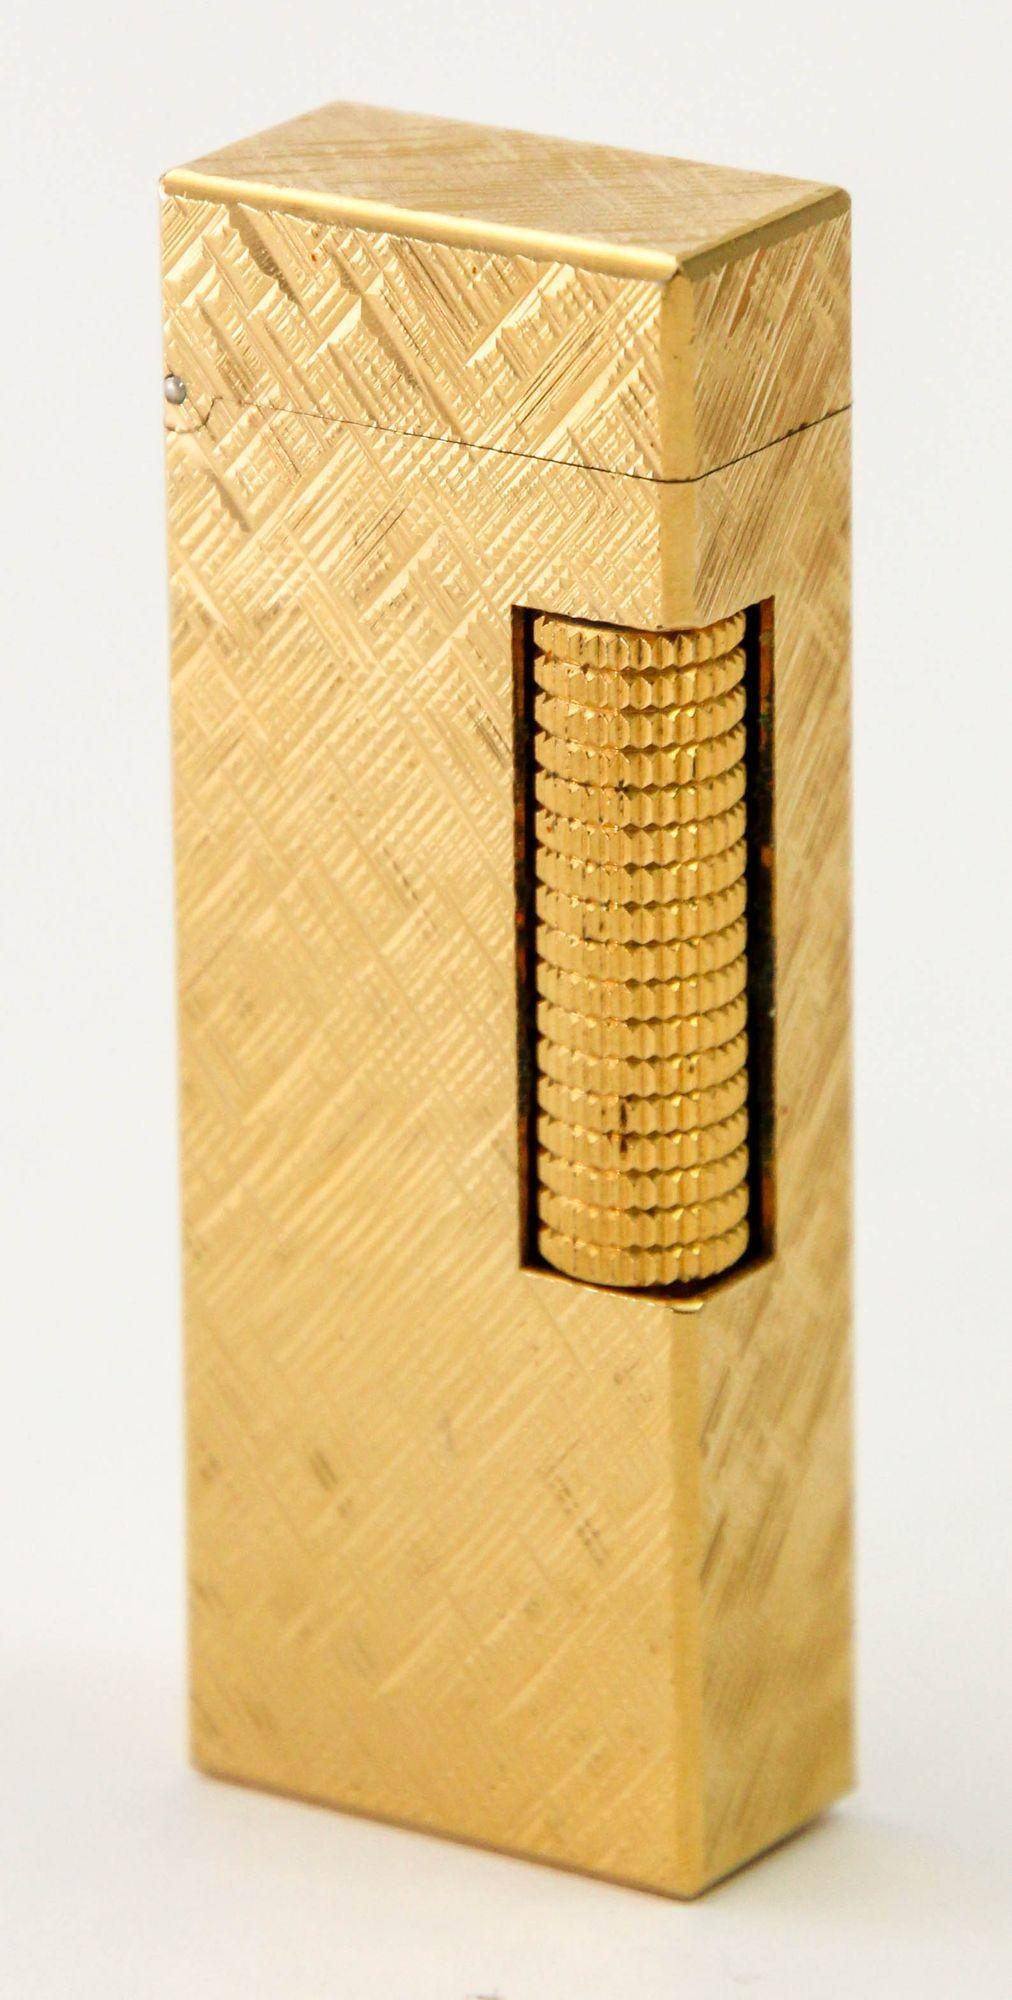 Rare Vintage Iconic Alfred Dunhill Gold Plated Lighter made in Switzerland.This beautiful Dunhill Rollagas 24k Gold Plated Florentine Pattern Lighter was crafted in the 1980s. It is a beautiful example of the true vintage Dunhill Rollagas series. It